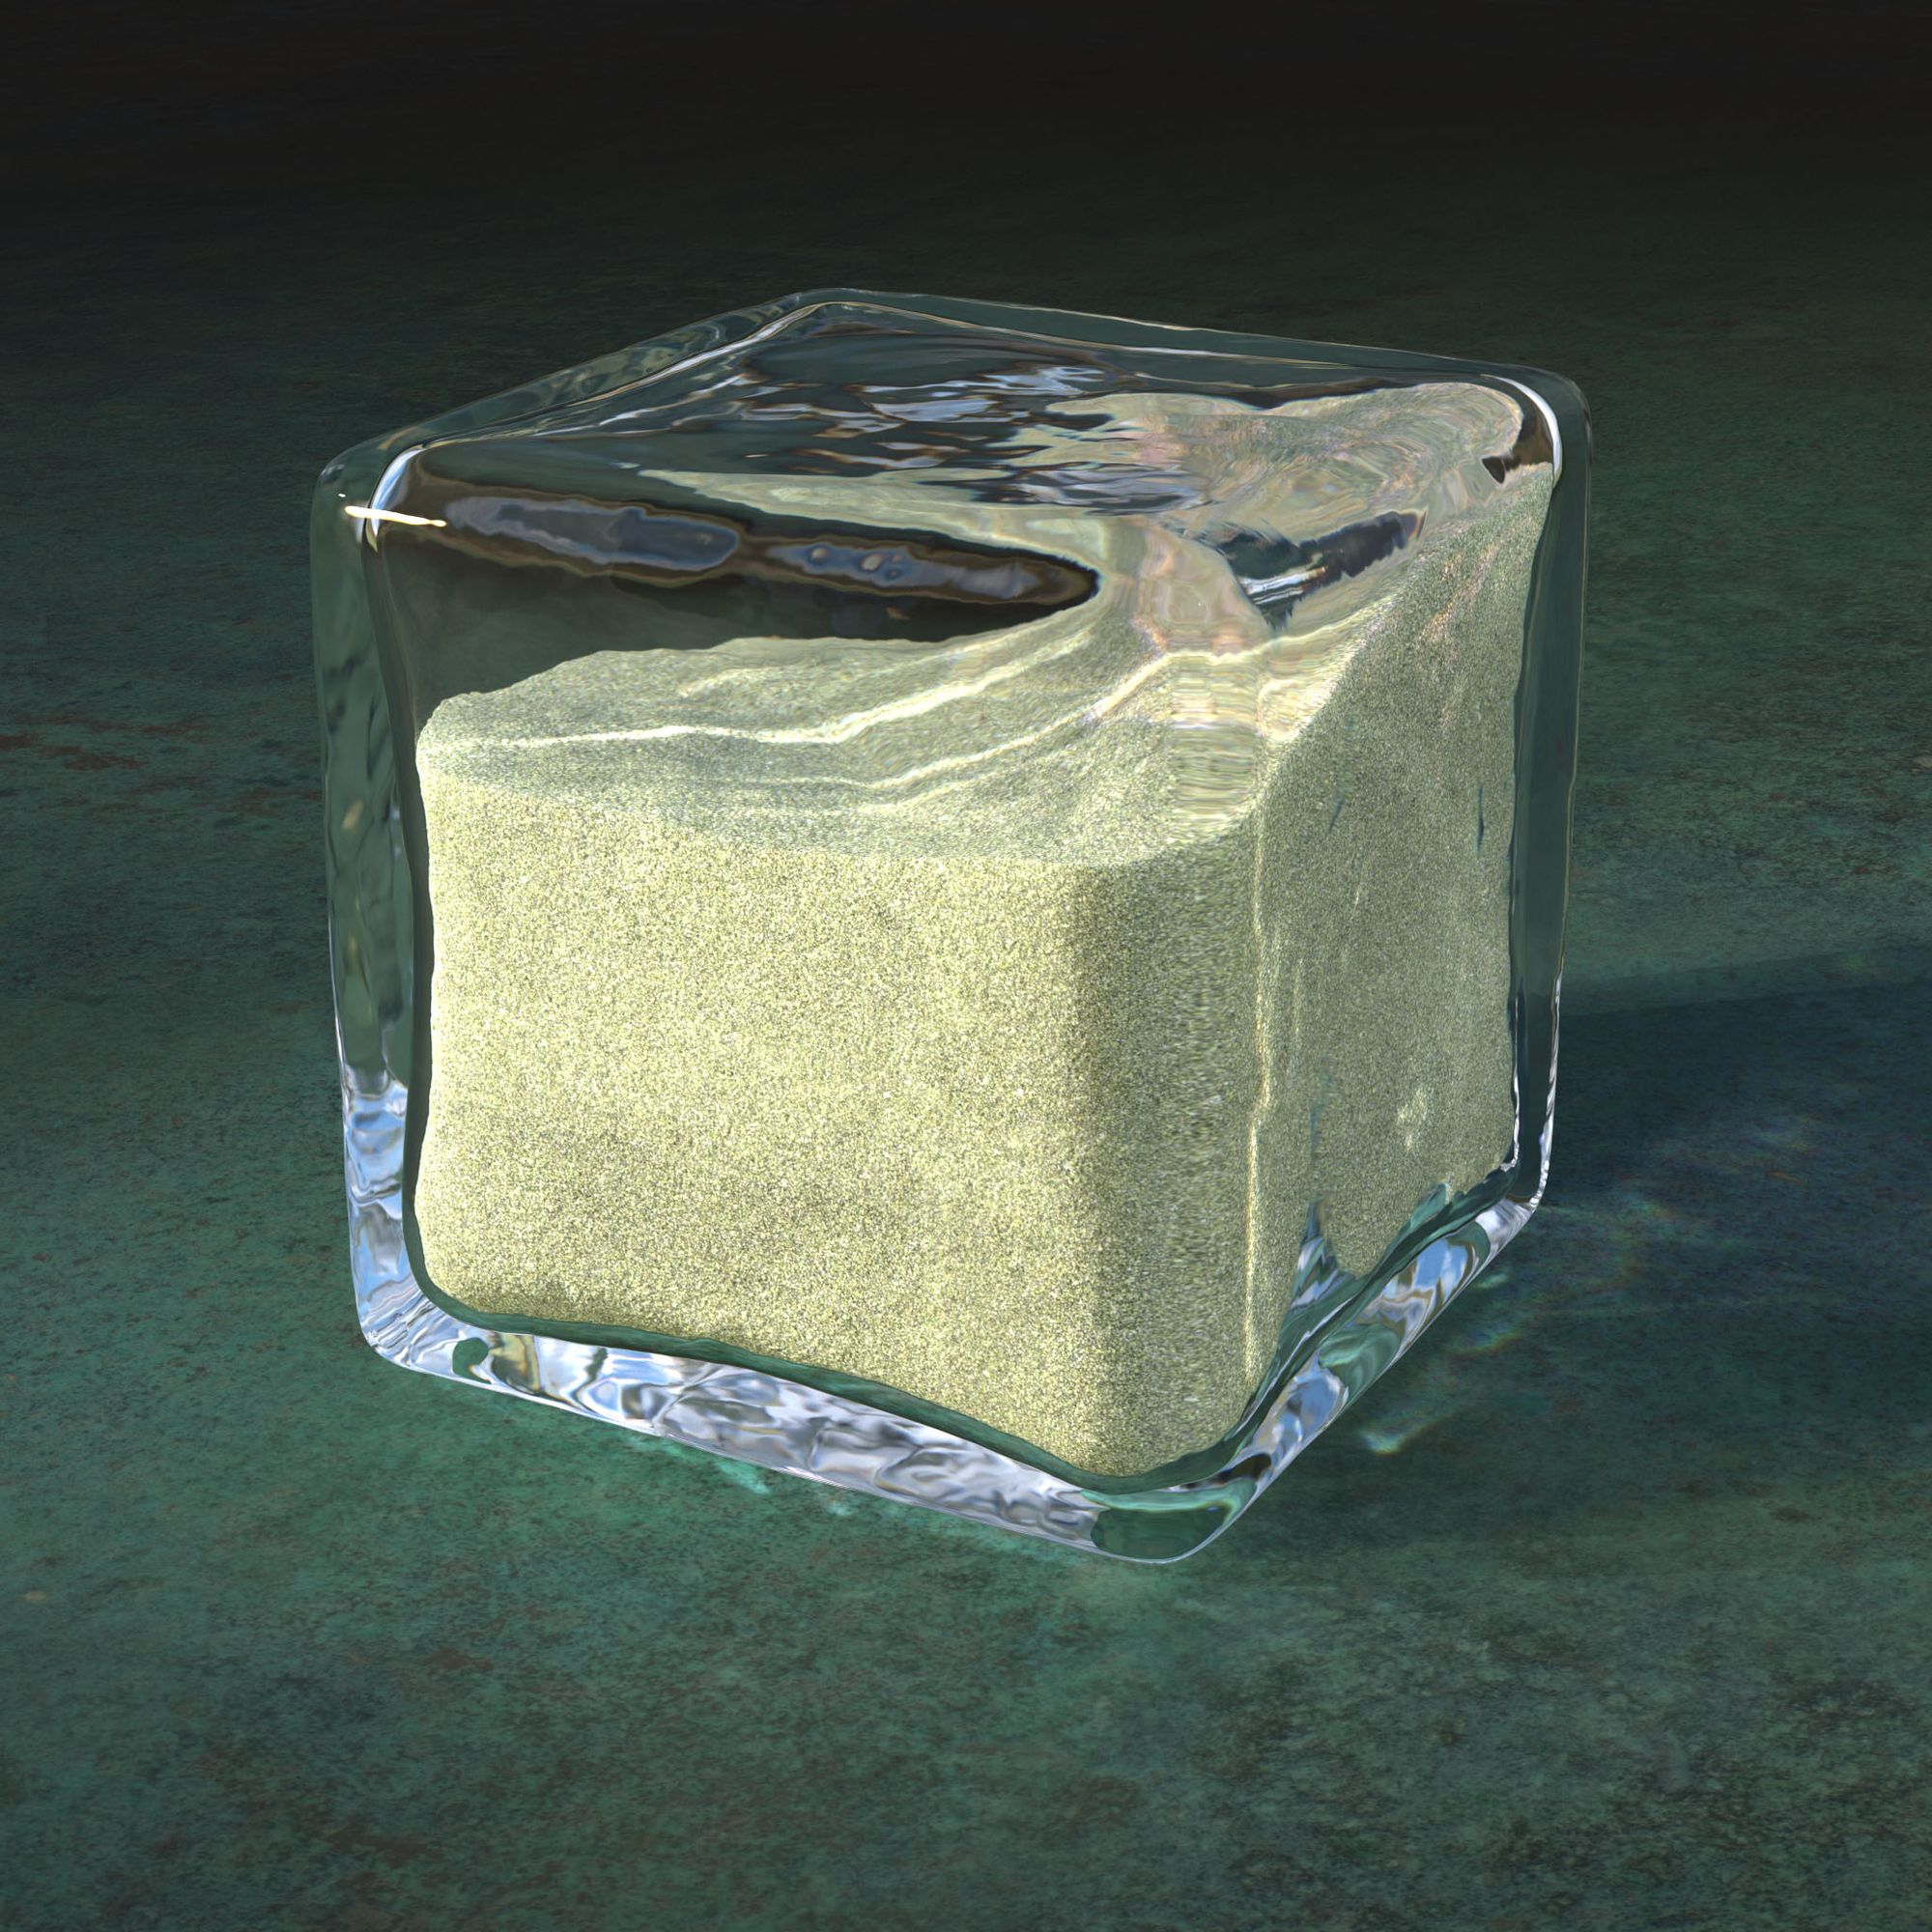 Photorealistic render of a glass block with thick and imperfect walls, mostly filled with a fine slightly green sand. Caustics and refraction scatter light through the block and onto a floor like rusted copper.